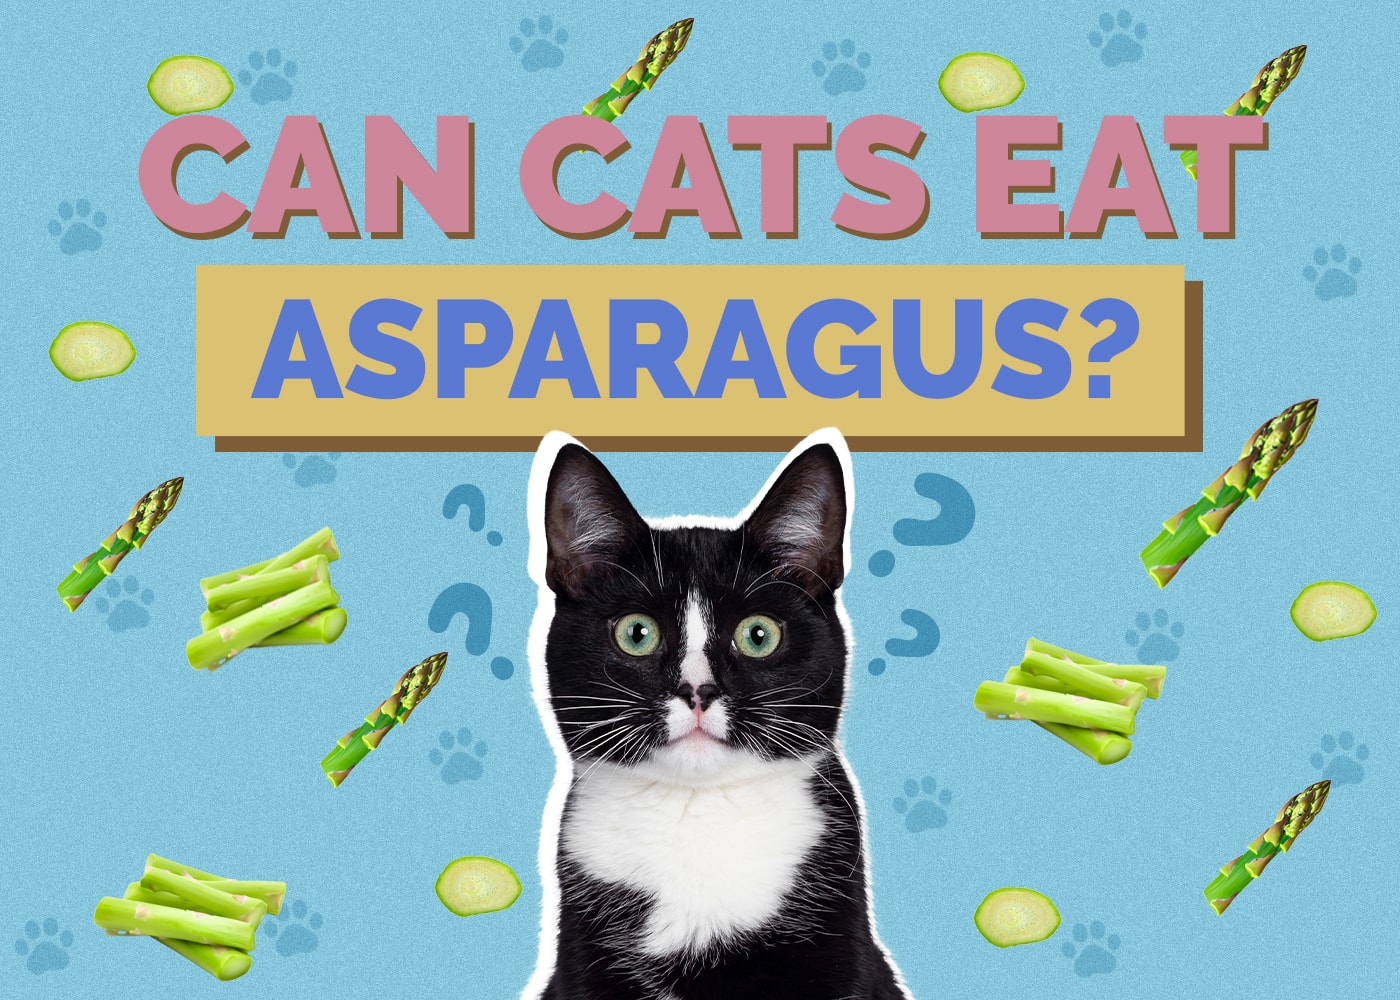 Can Cats Eat asparagus